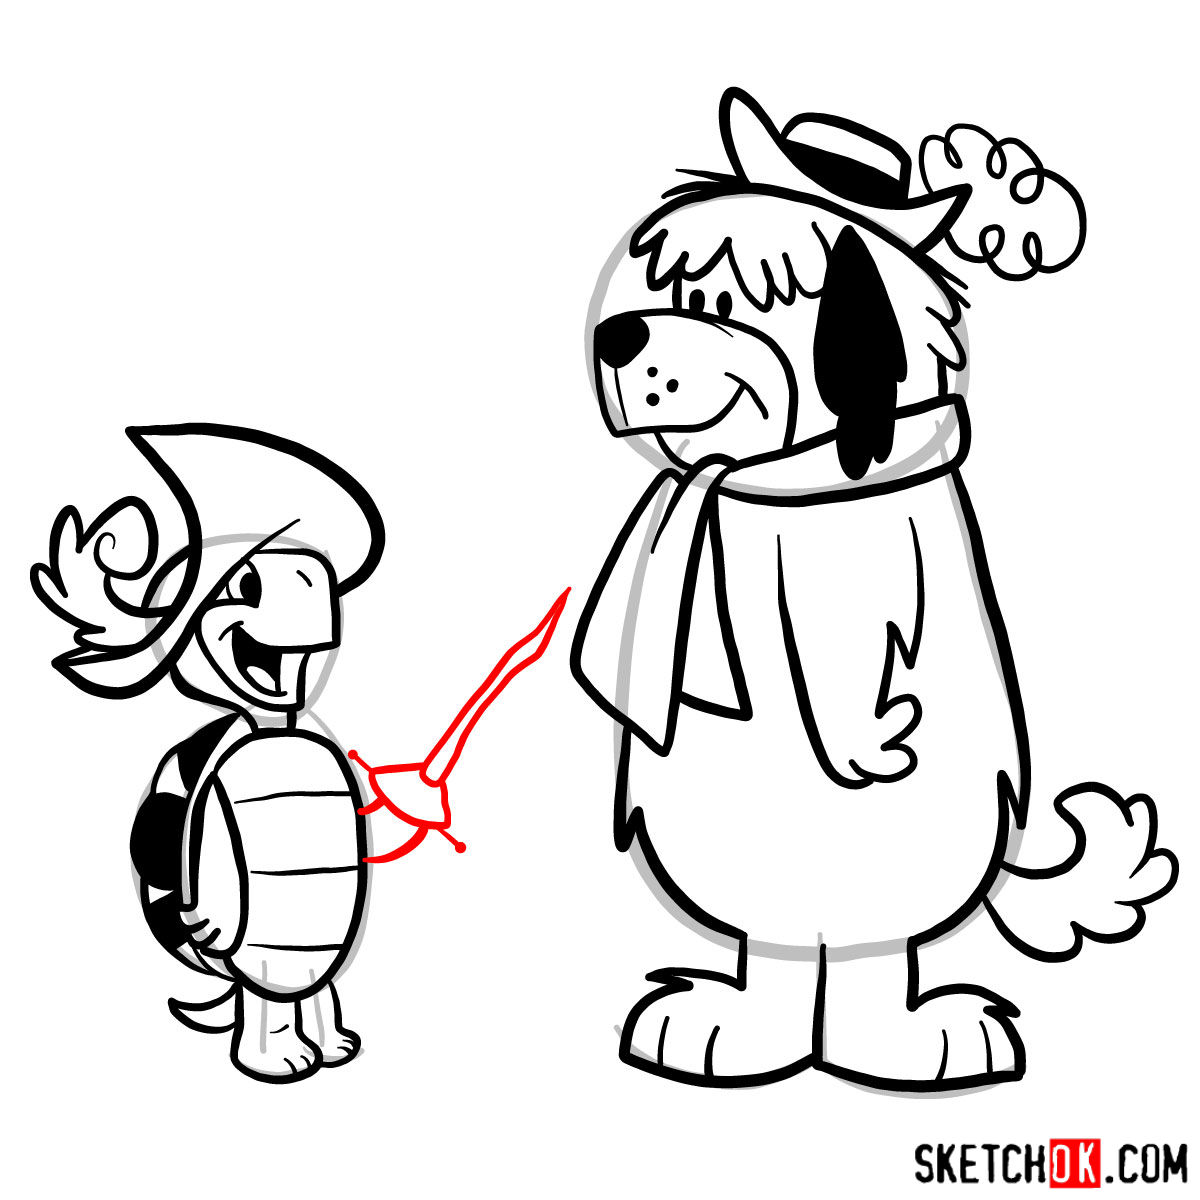 How to draw Touche Turtle and Dum Dum - step 16